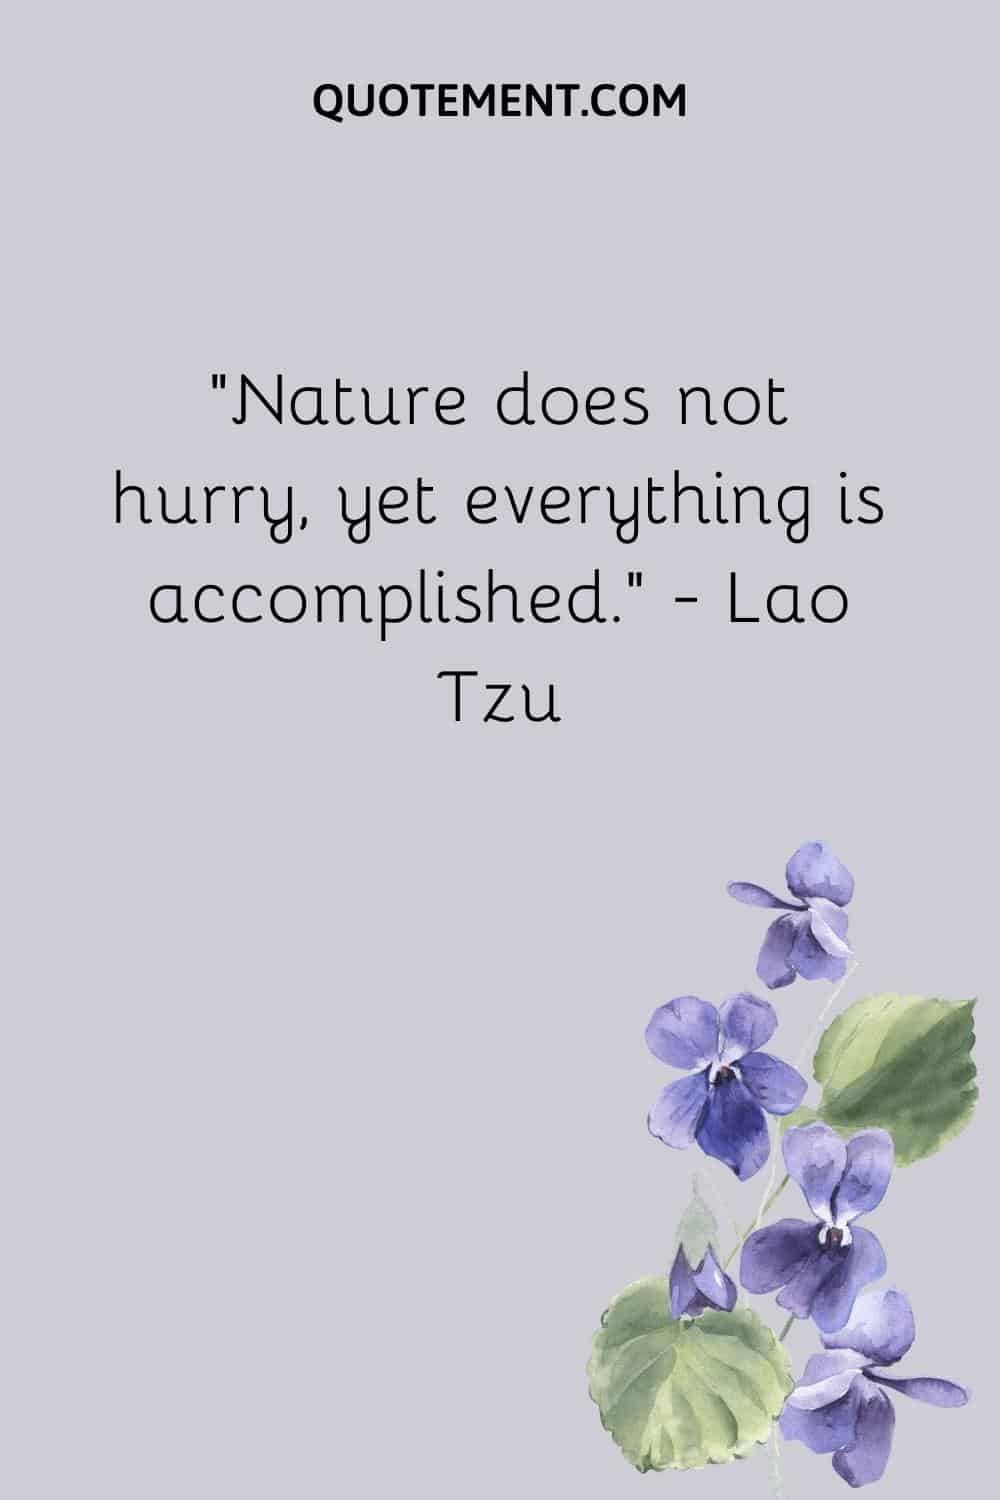 “Nature does not hurry, yet everything is accomplished.” — Lao Tzu